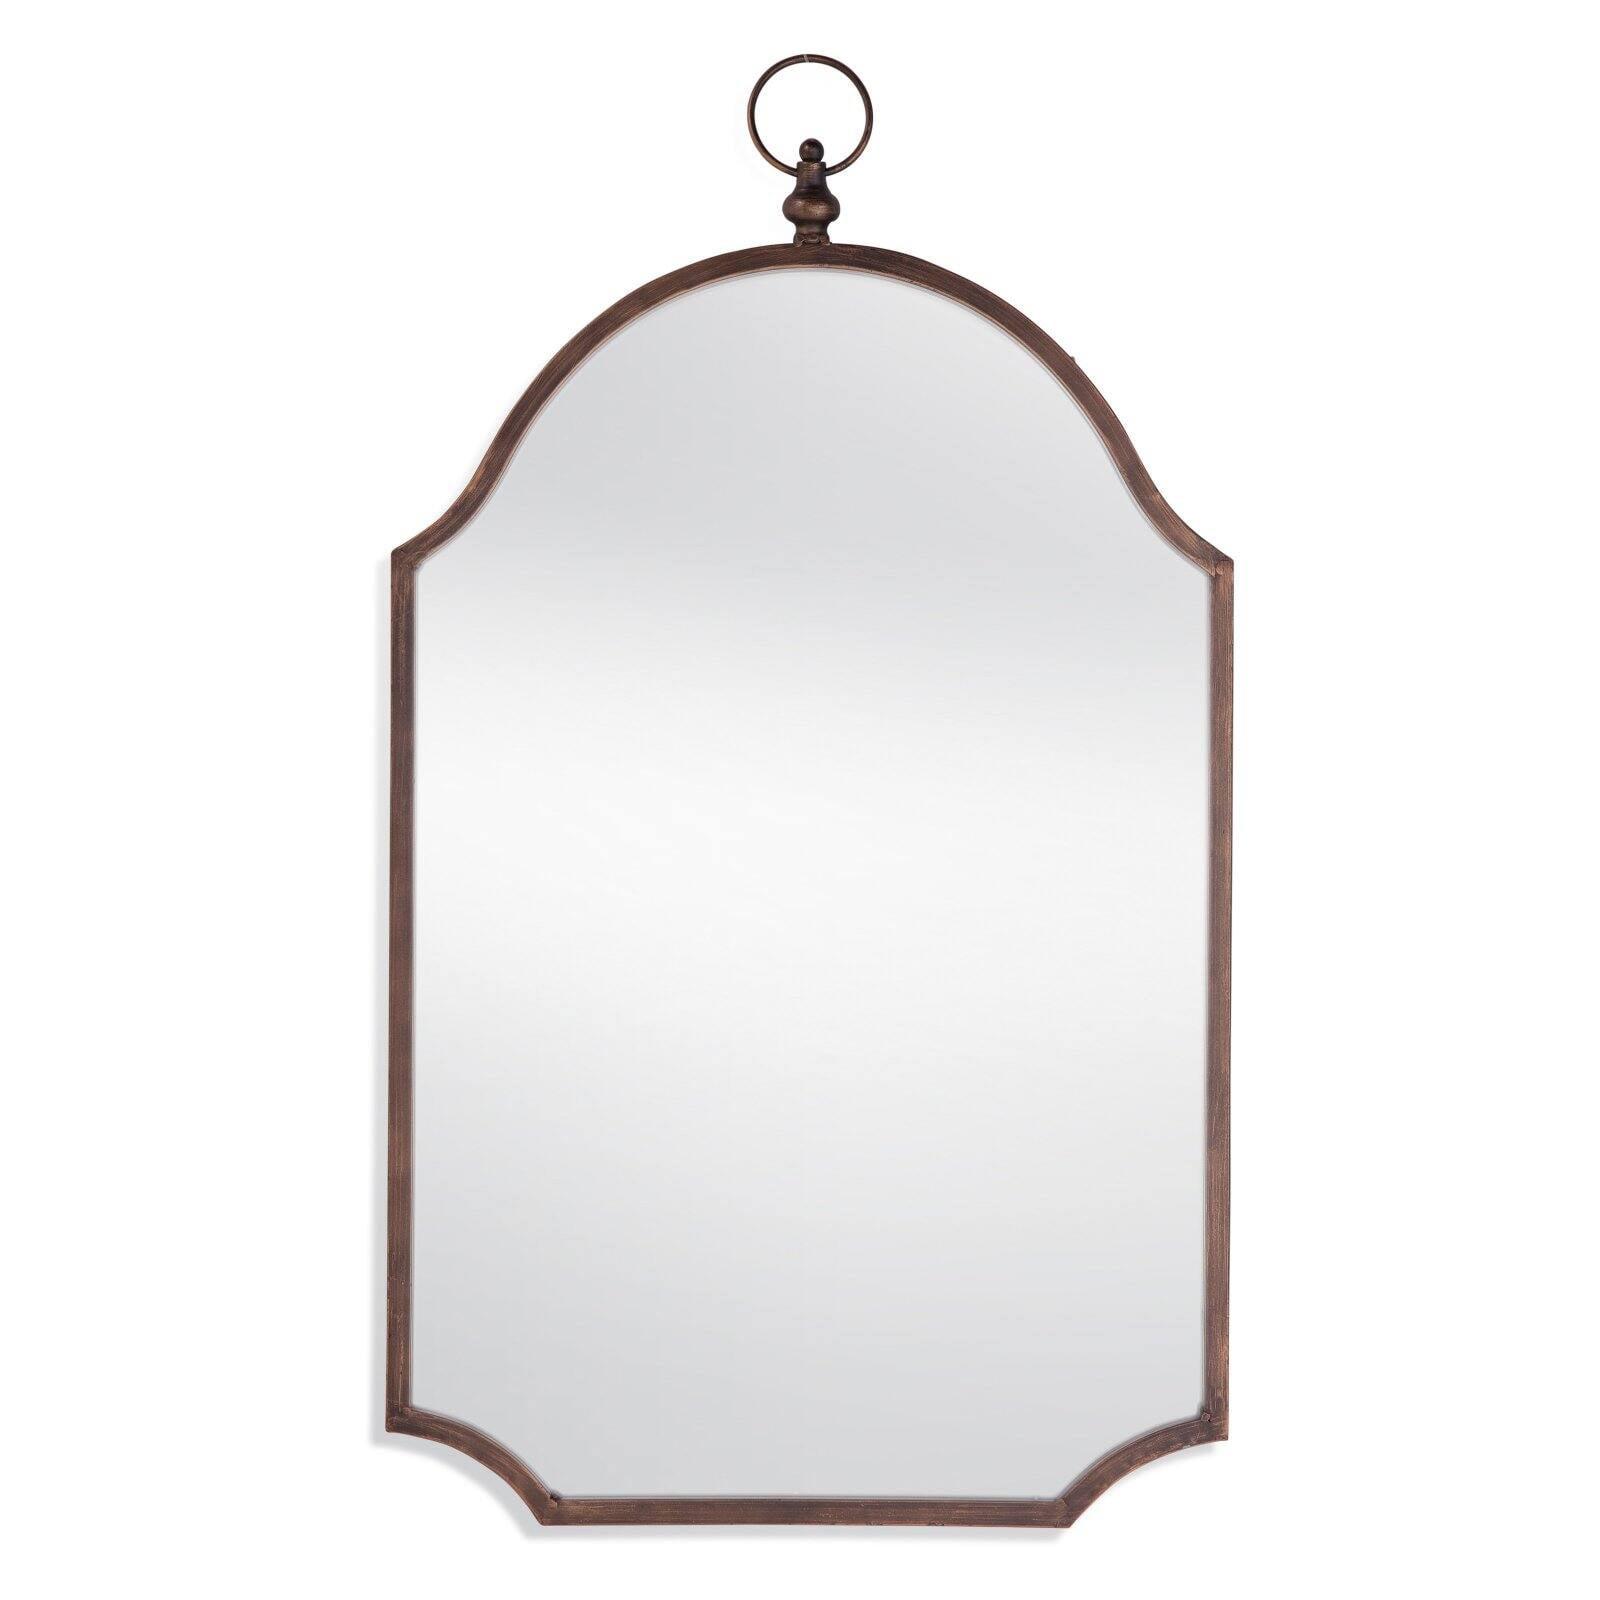 Transitional Malina Rectangular Wall Mirror with Antiqued Bronze Finish